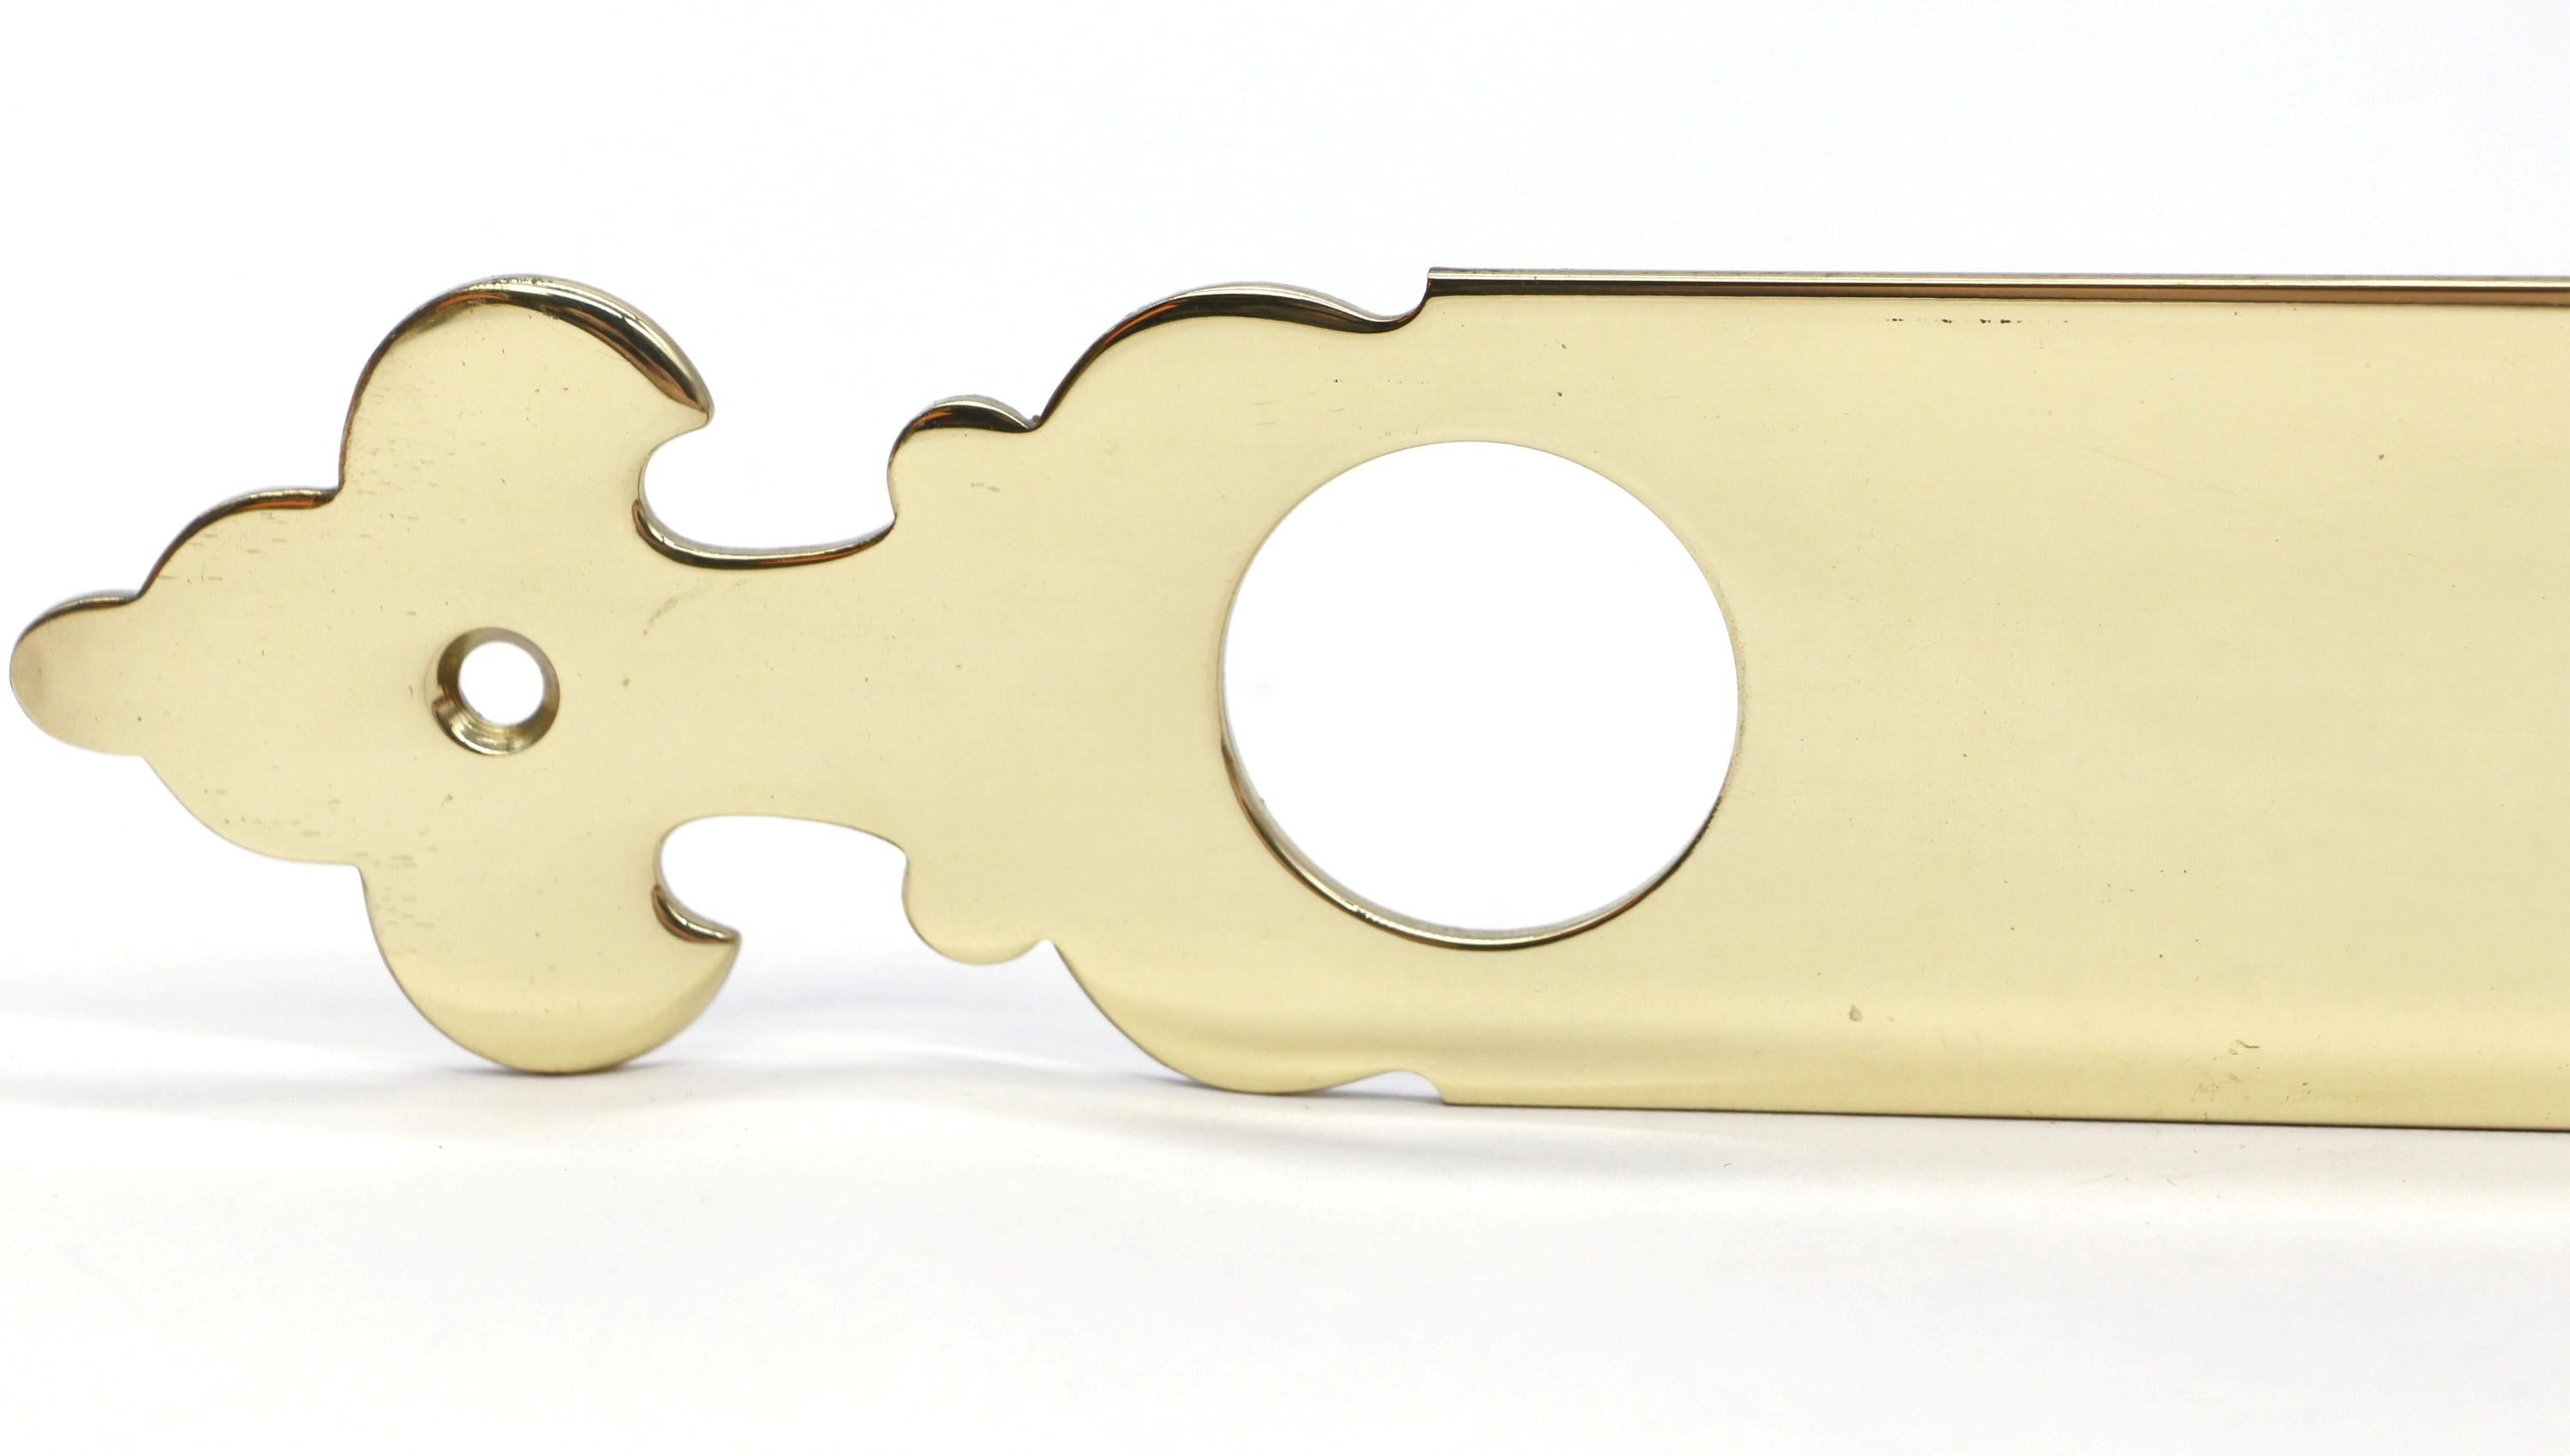 Make a grand entrance with our vintage polished brass entry door pull. Complete with a lock insert and thumb latch, its polished finish exudes elegance while providing secure functionality. Elevate your door's appeal with this stunning vintage